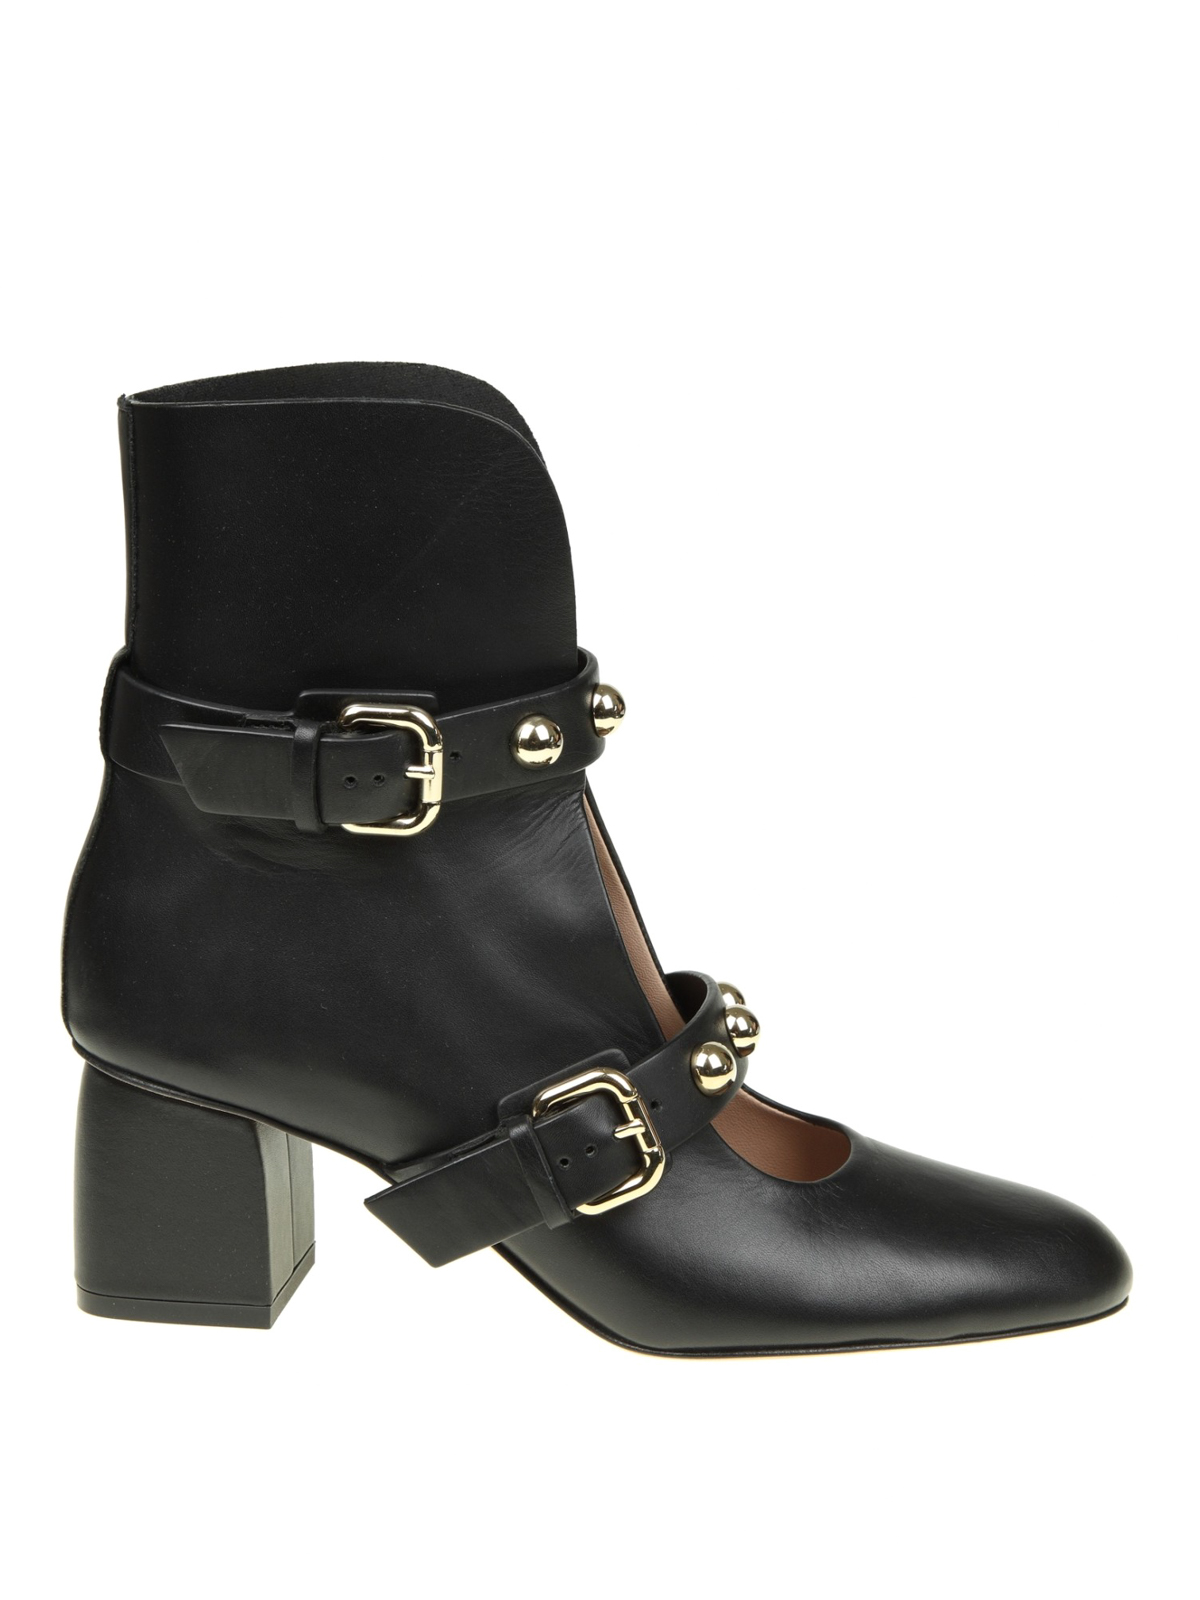 leather ankle boots - ankle boots 